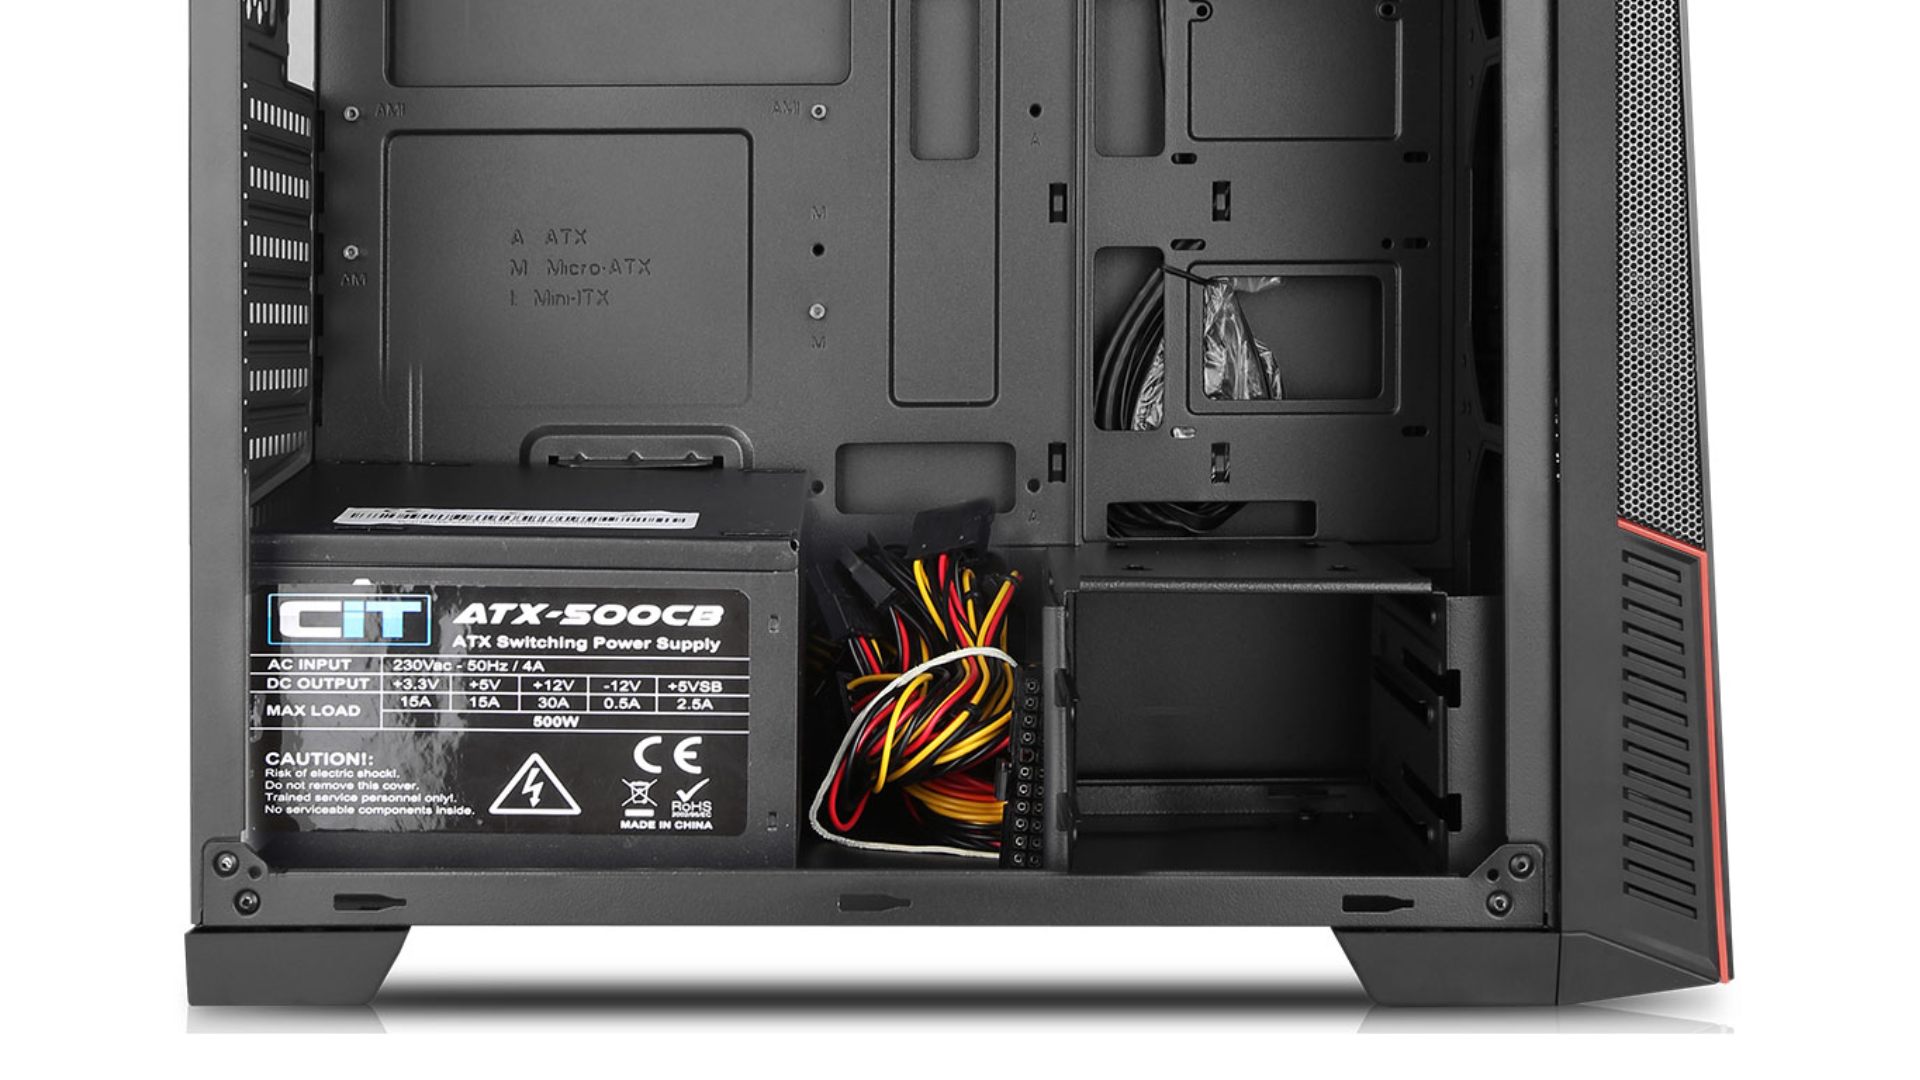 How to install power supply: PC case with PSU at bottom with connected cables